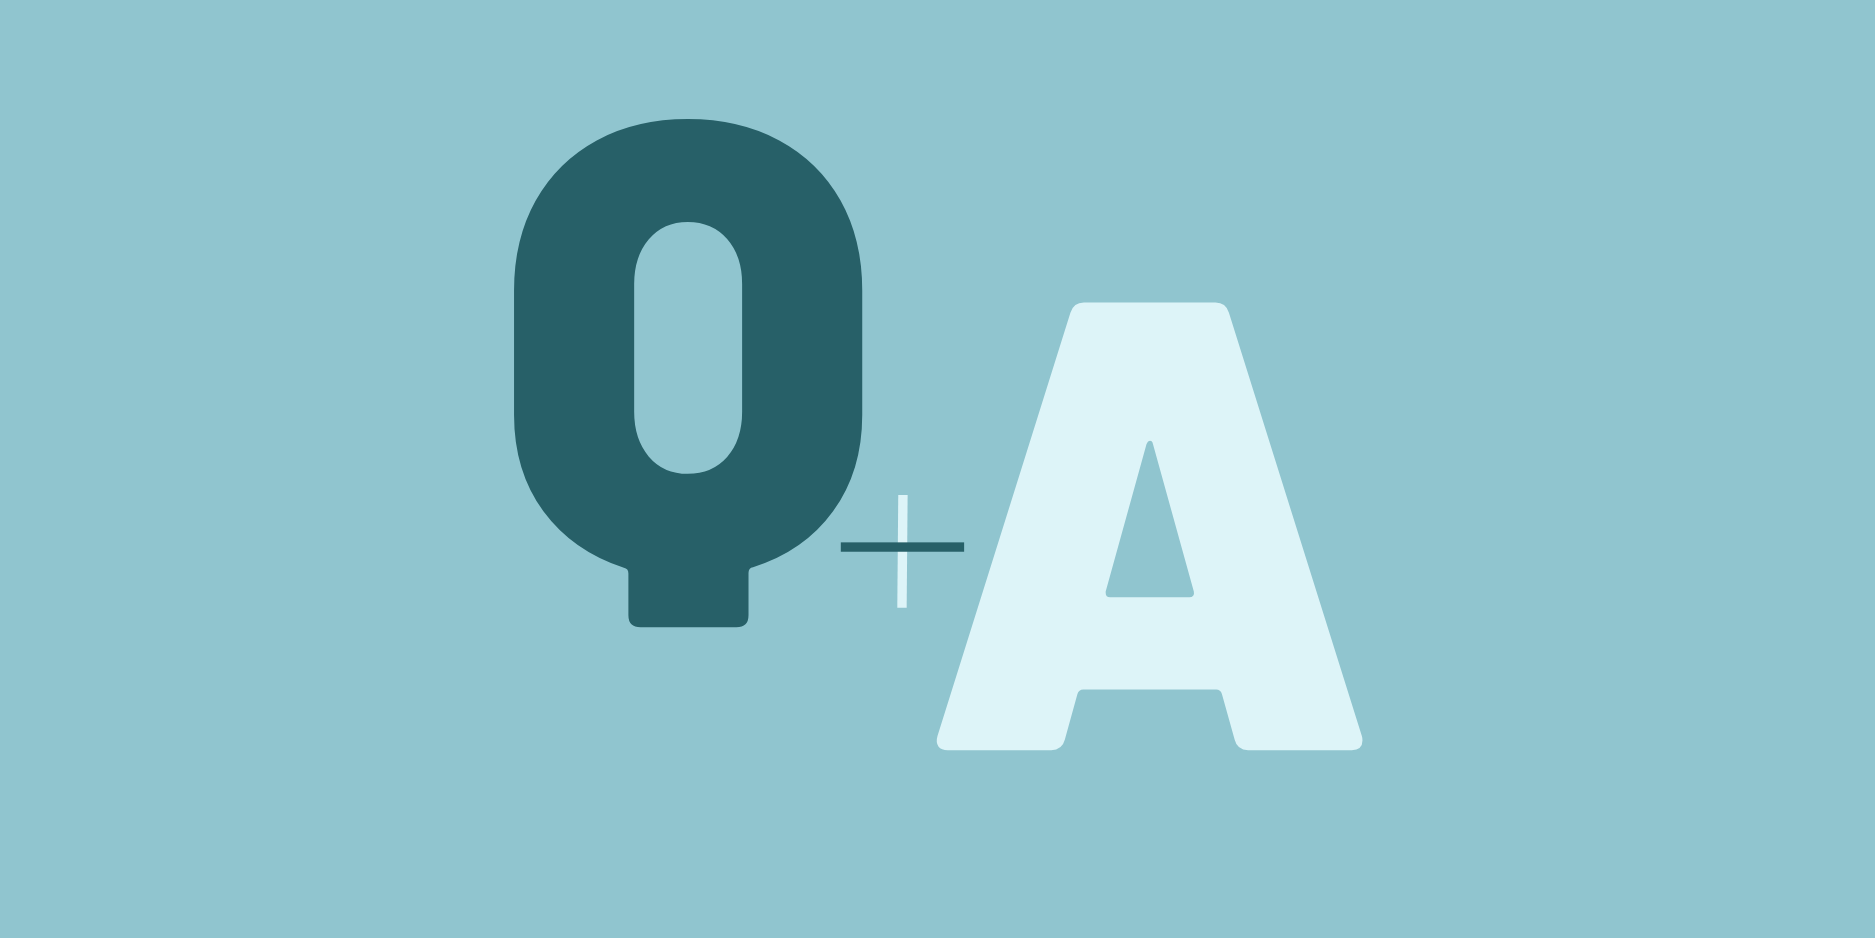 Q+A: What are you planning on or already for a better business?